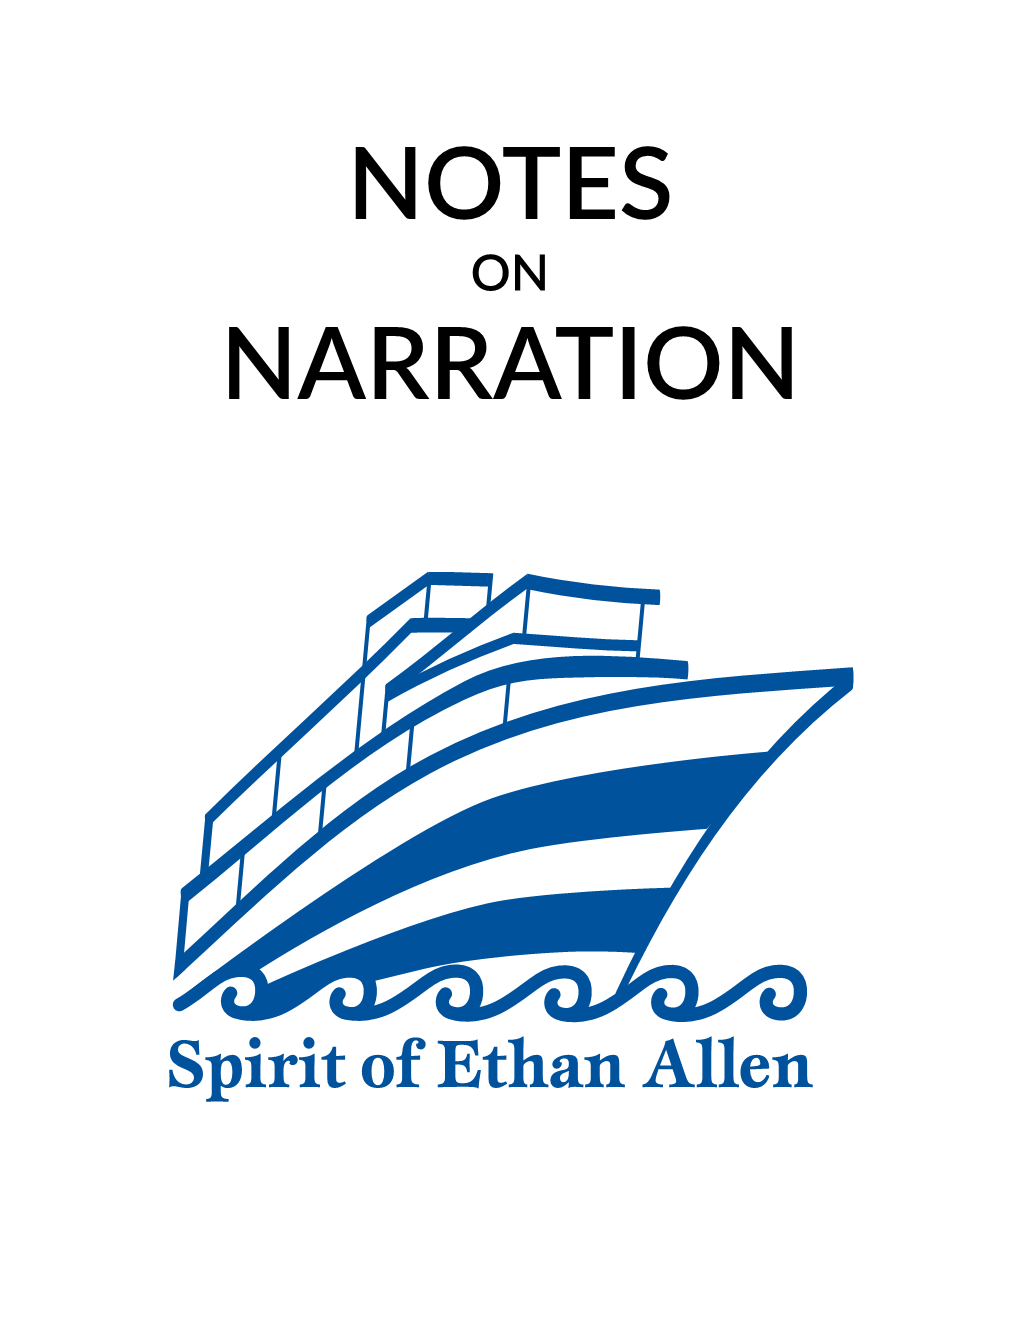 Notes on Narration